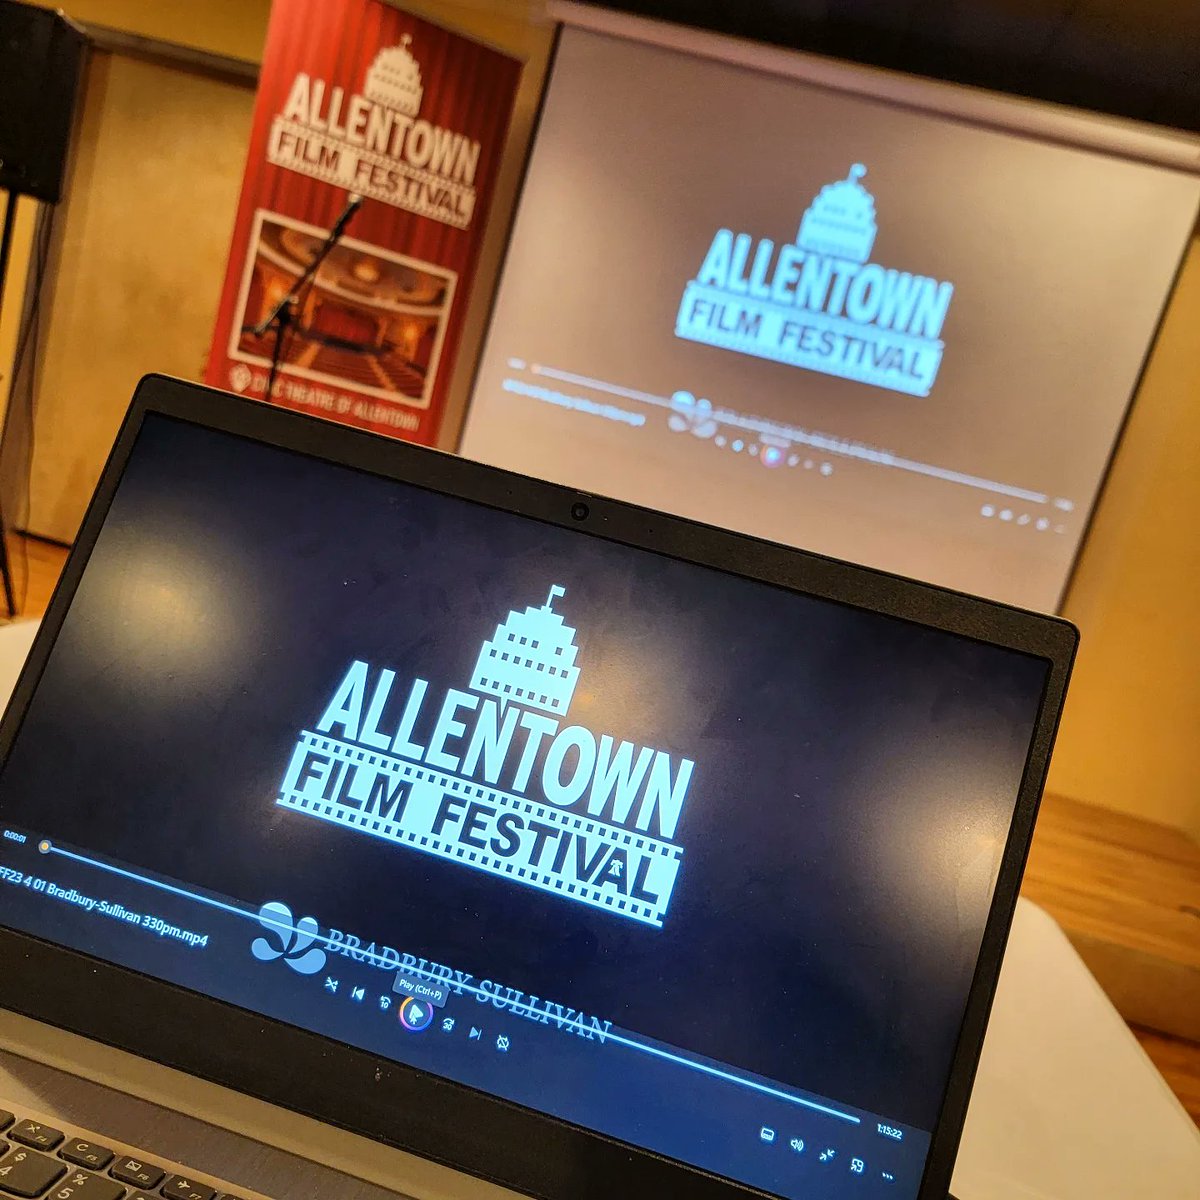 🏳️‍🌈🏳️‍⚧️ Thanks to everyone who helped us kick off the inaugural Allentown Film Festival at @BSCLehighValley today! See you April 13-16 for even more independent films from the Lehigh Valley and around the globe!